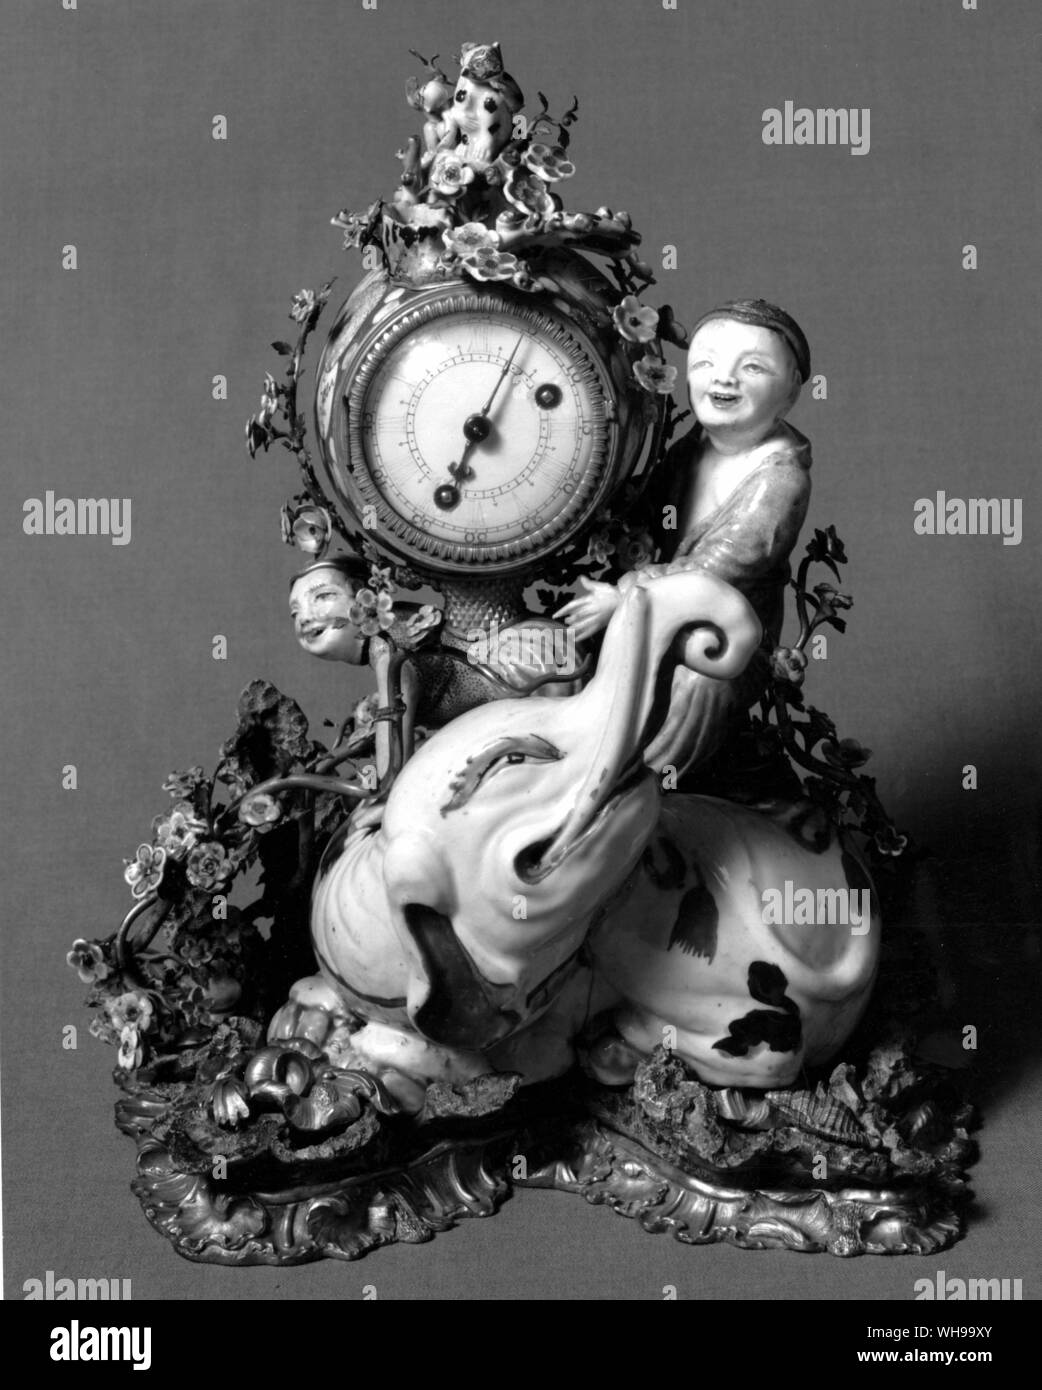 Porcelain mounted in German 18th century ormolu to hold a clock. The elephant is 17th century Japanese, the boys are 18th century Chinese and the flowers are Meissen or Vincennes Stock Photo